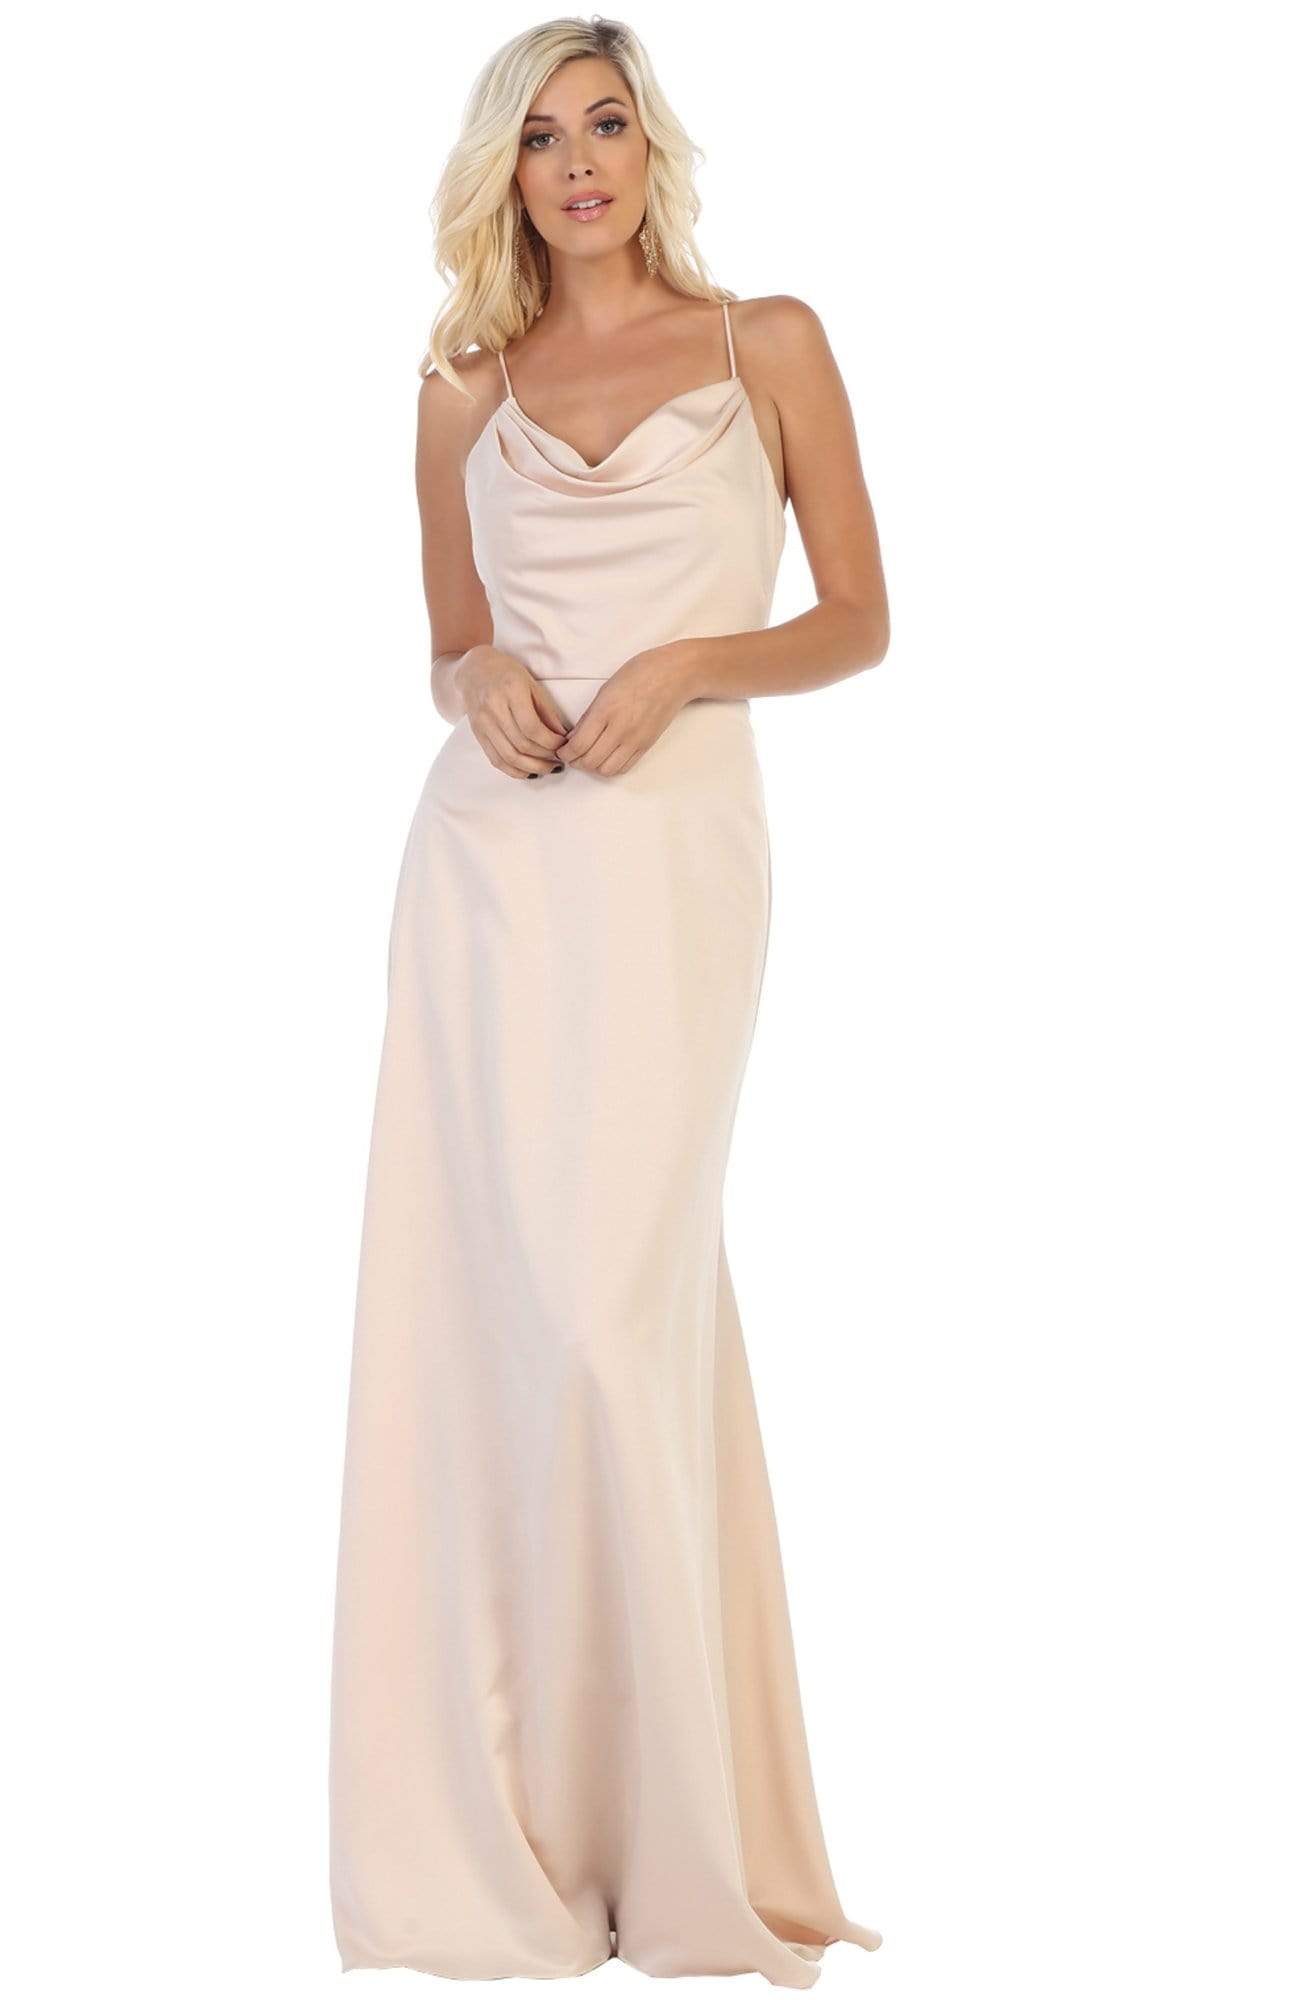 May Queen - MQ1594 Halter Neck Strappy Back Satin A-Line Gown Special Occasion Dress 2 / Champagne